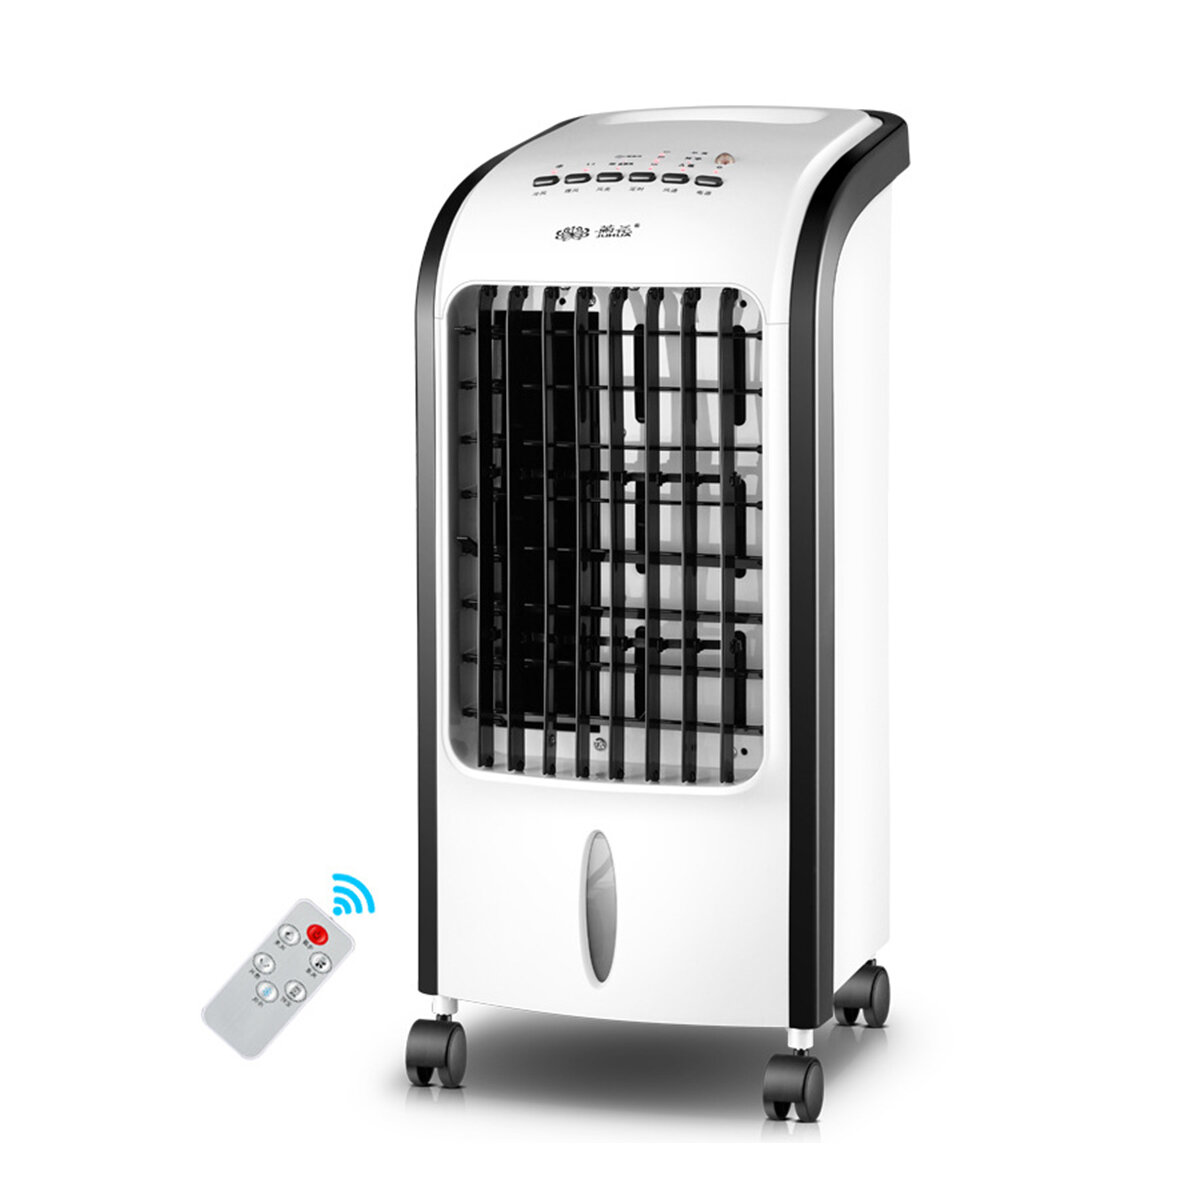 220V Portable Air Conditioner Conditioning 3 Gear Wind Speed Fan Humidifier Cooler Cooling System